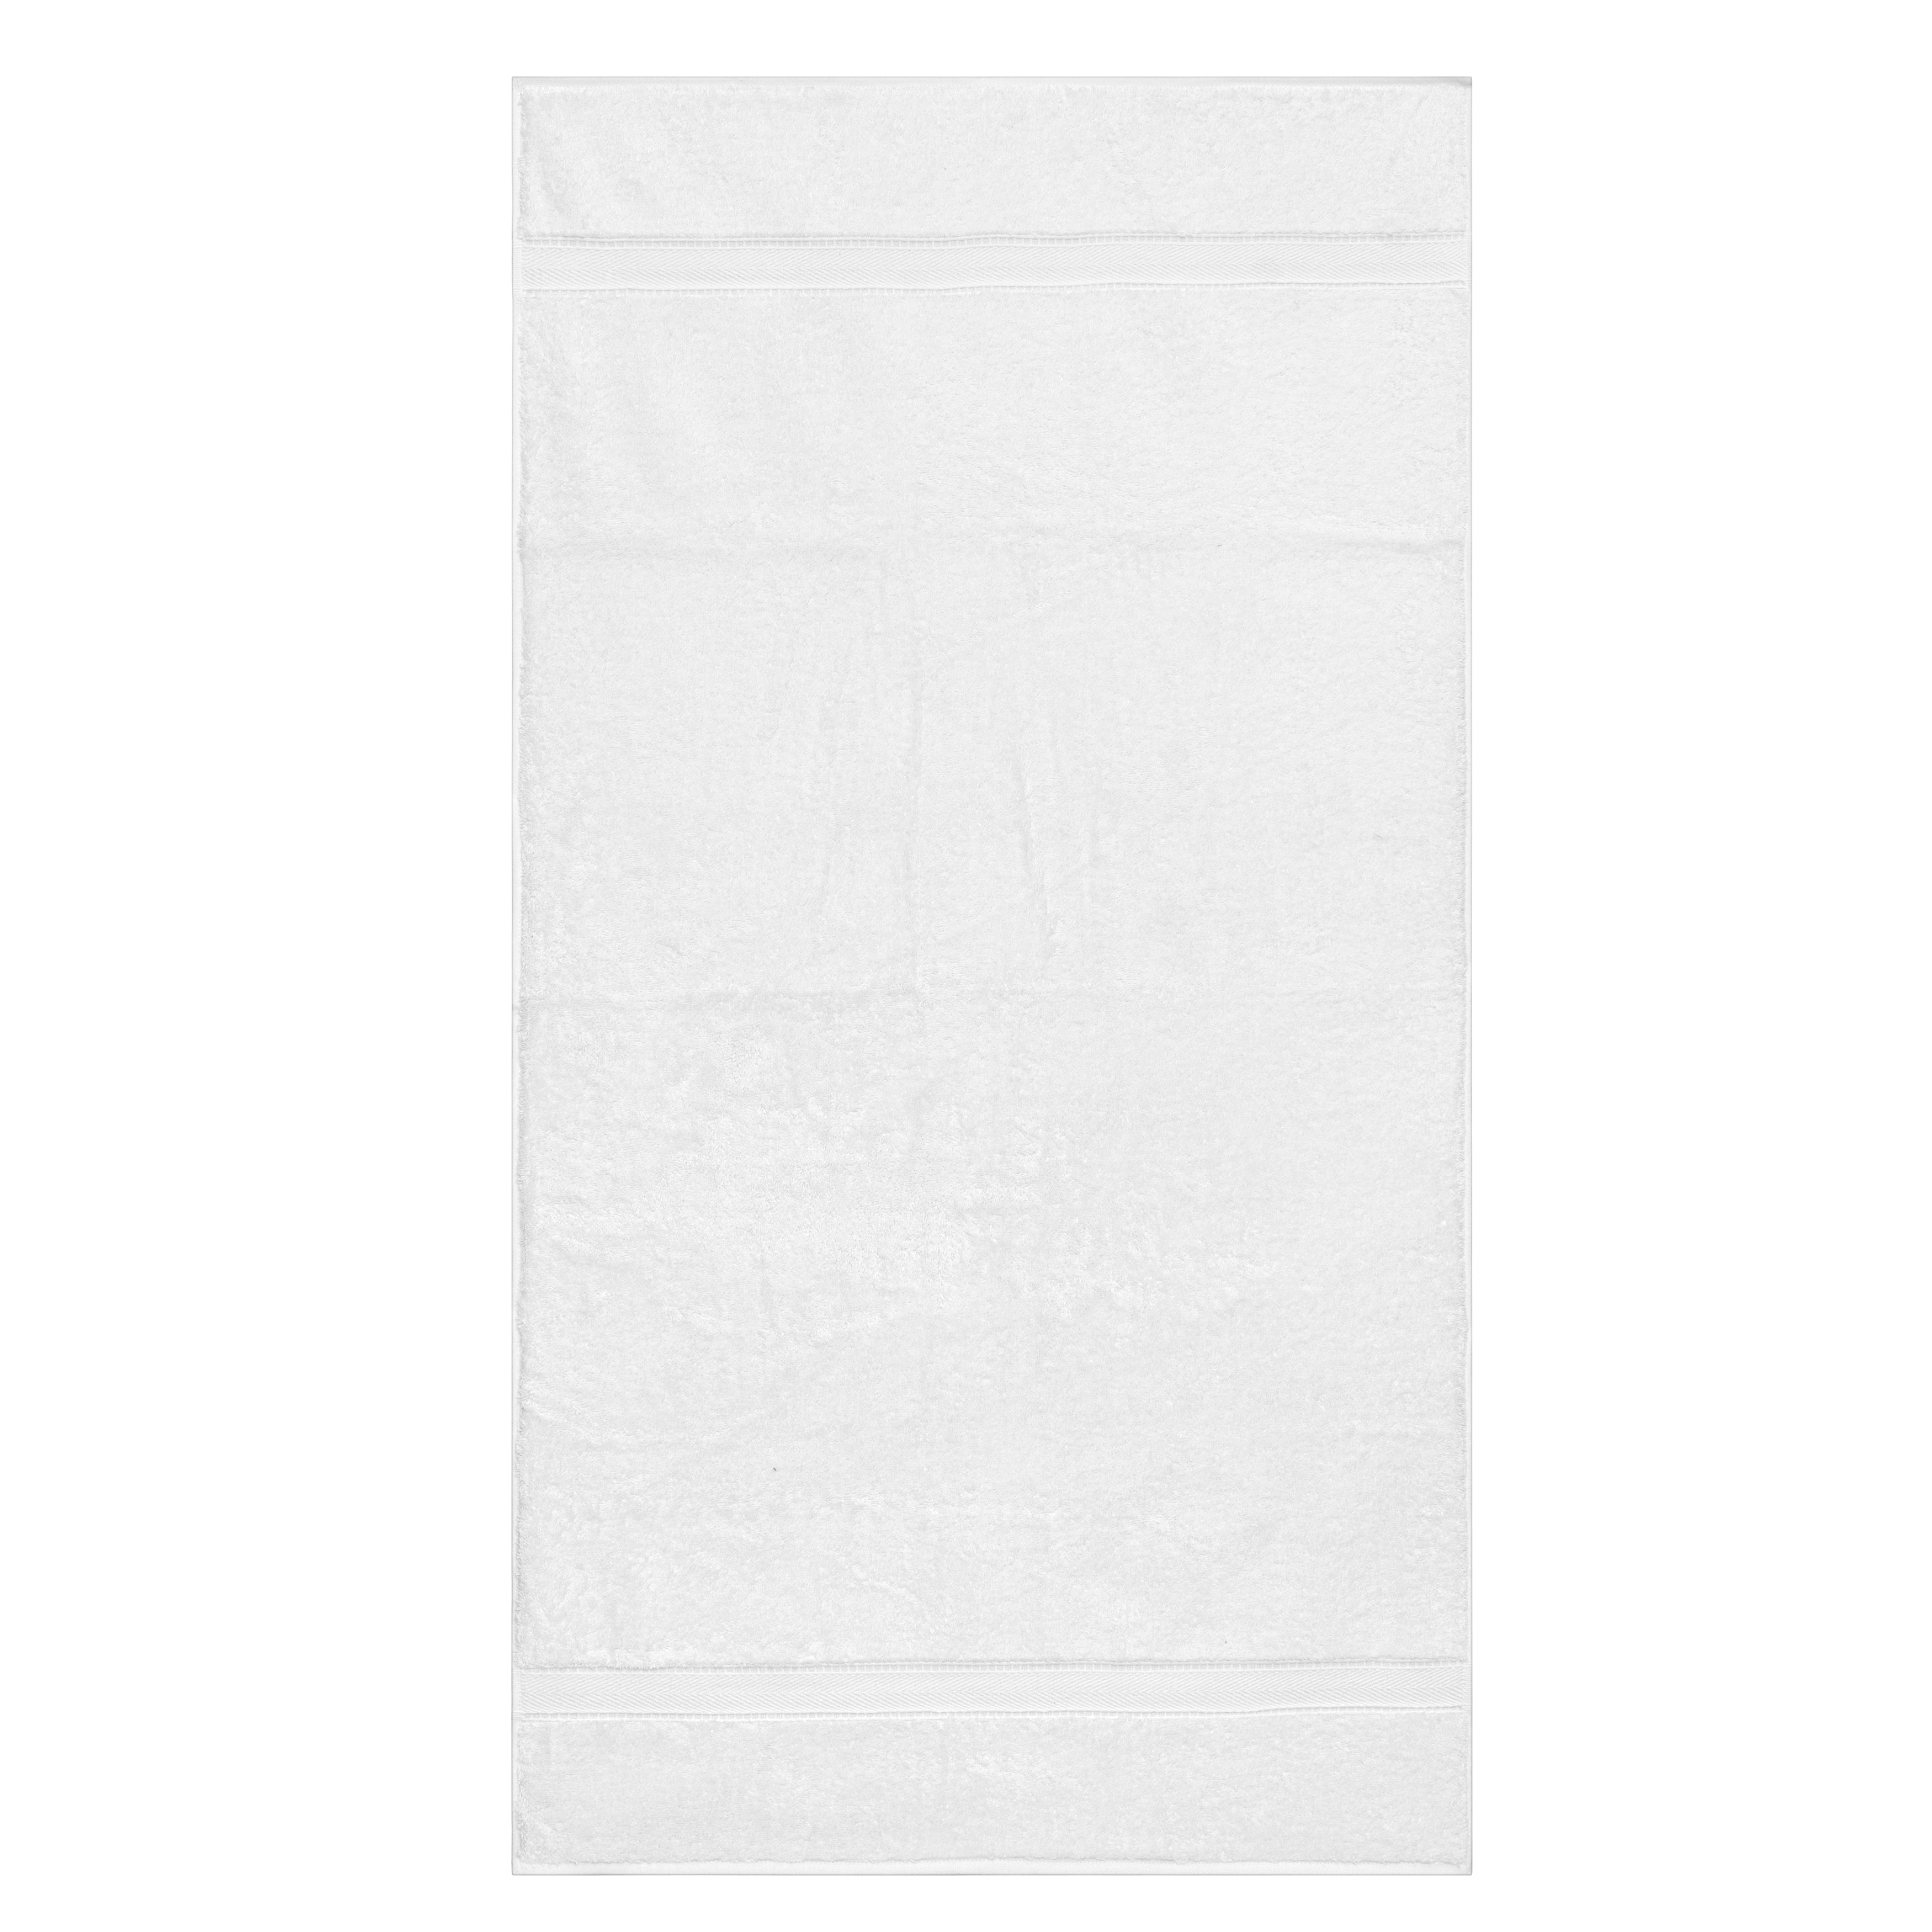 https://ak1.ostkcdn.com/images/products/is/images/direct/57bada3a89e75002448c44d73381d5653af0f079/Authentic-Hotel-and-Spa-Turkish-Cotton-6-piece-Towel-Set.jpg